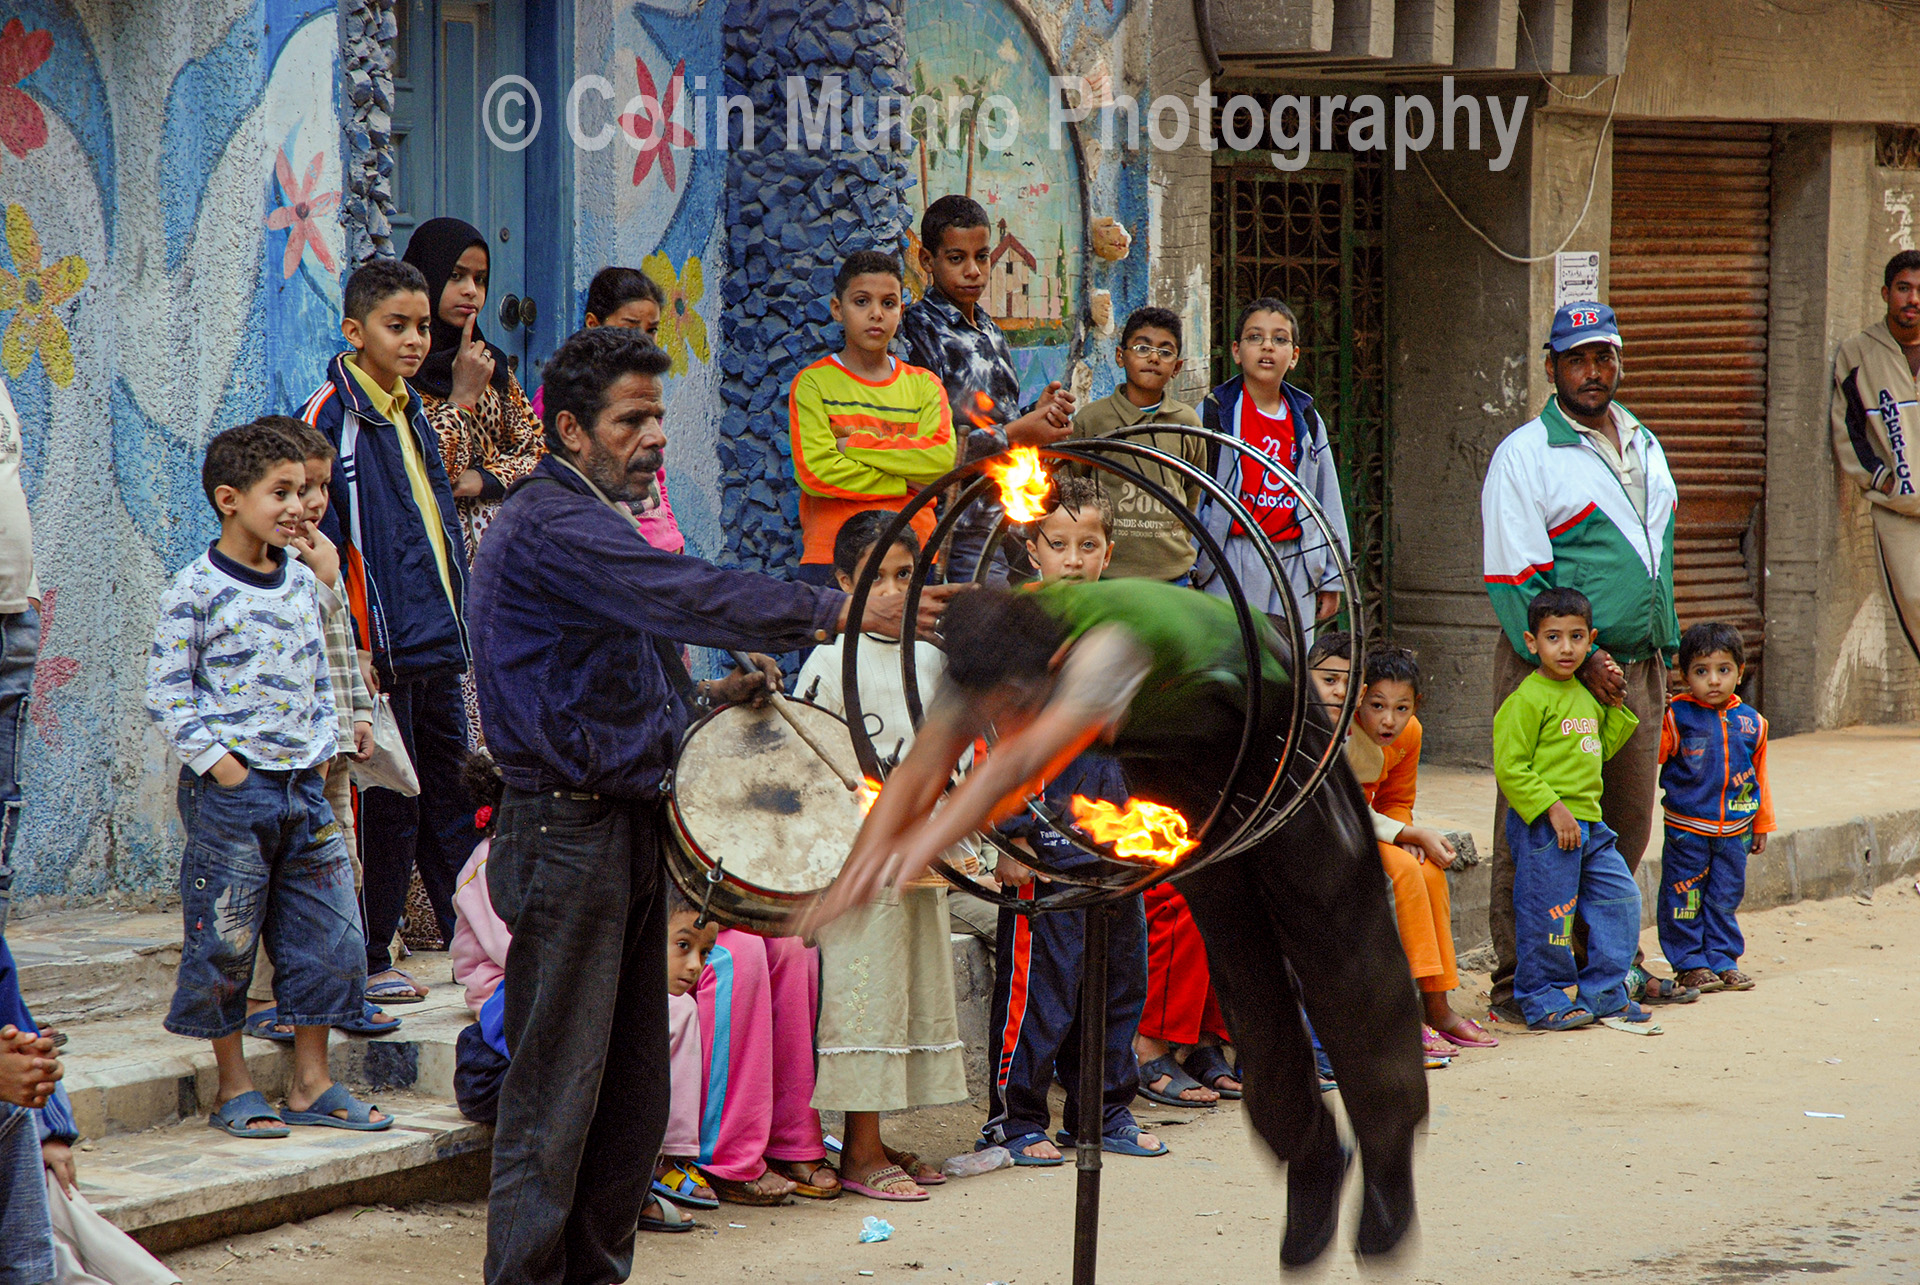 Street performers in the backstreets of Abu Qir seaport, Nile Delta, Egypt. www.colinmunrophotography.com